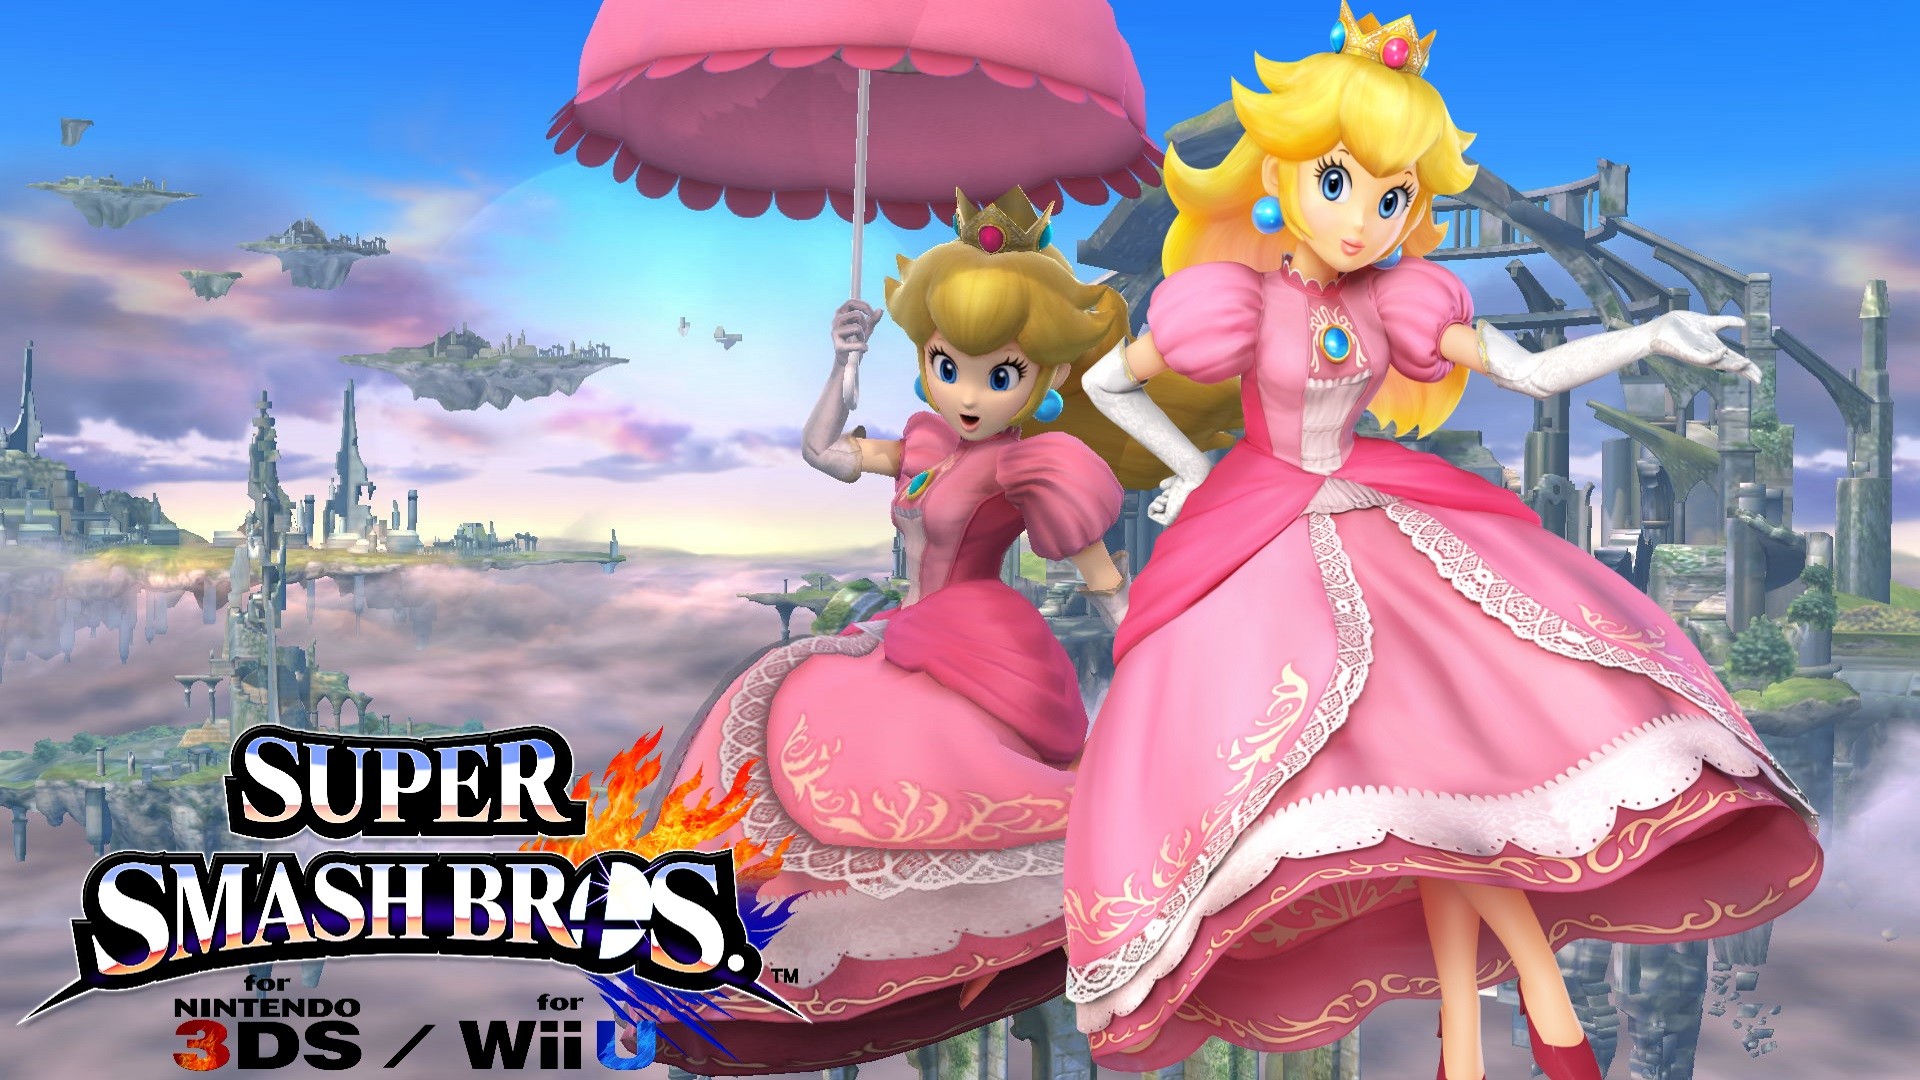 1920x1080 For 3DS/Wii U Peach Wallpaper by Chrisgamix